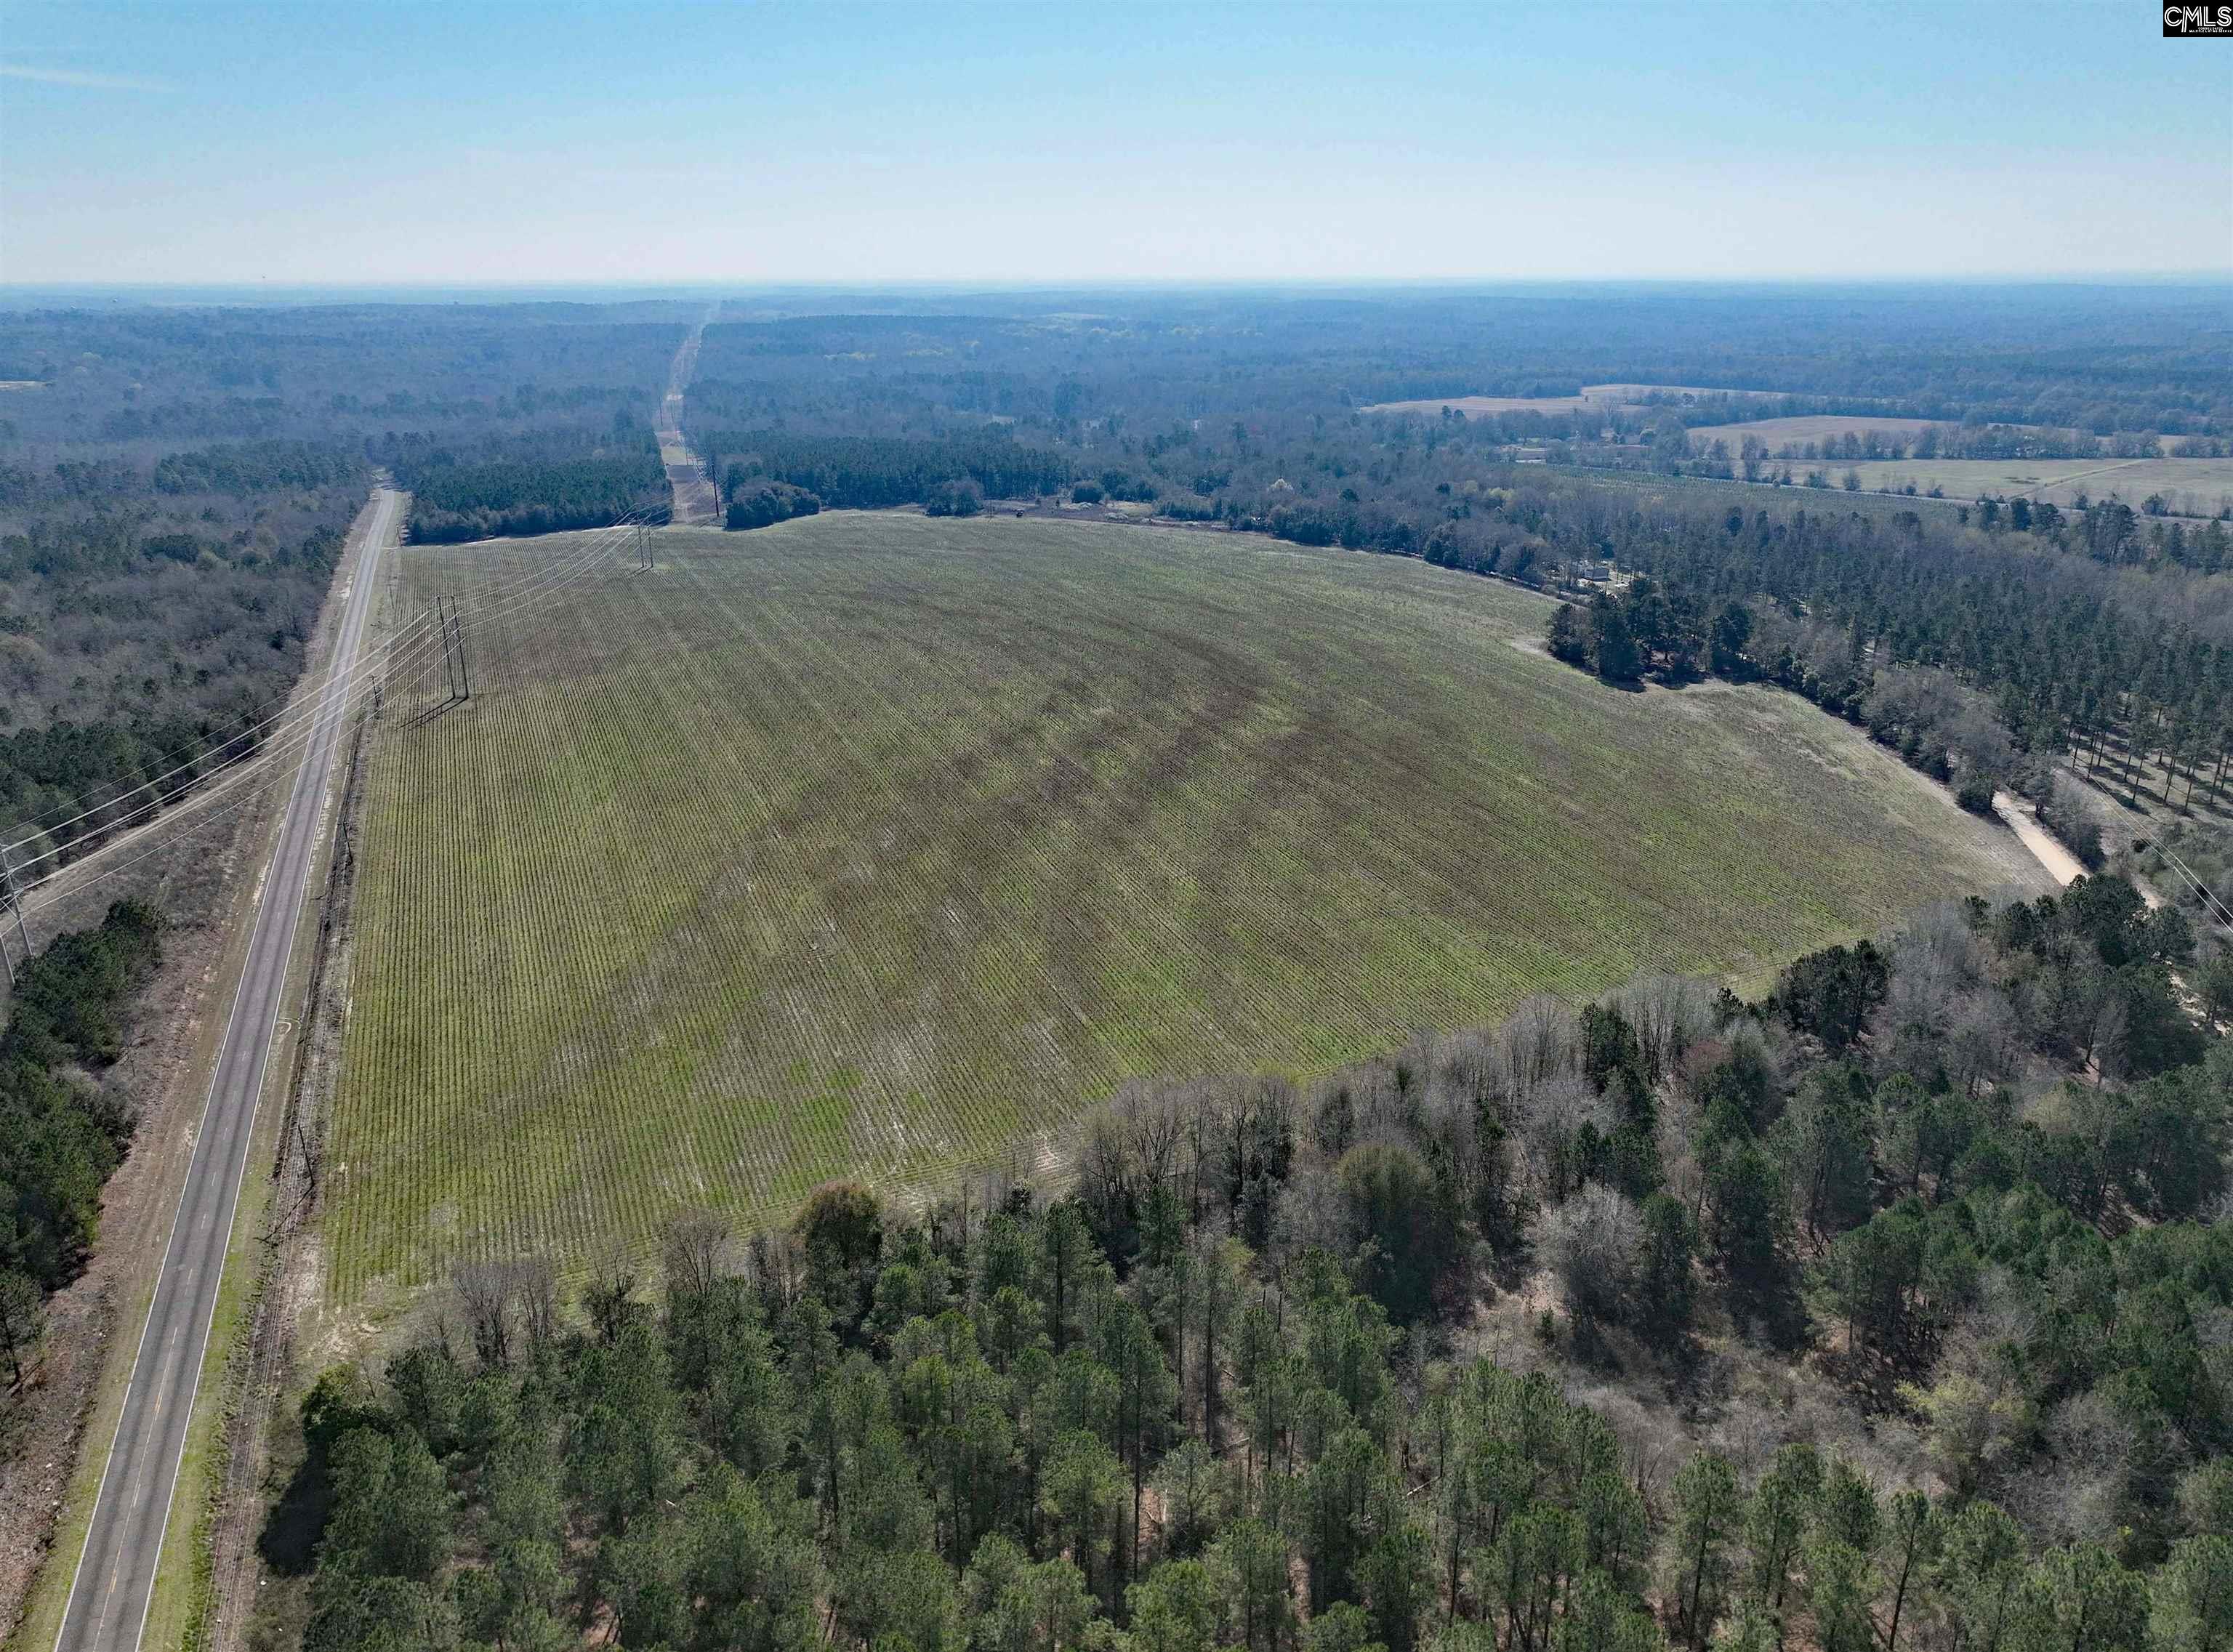  Lots For Sale - 000 Salley Road, Salley, SC - 1 